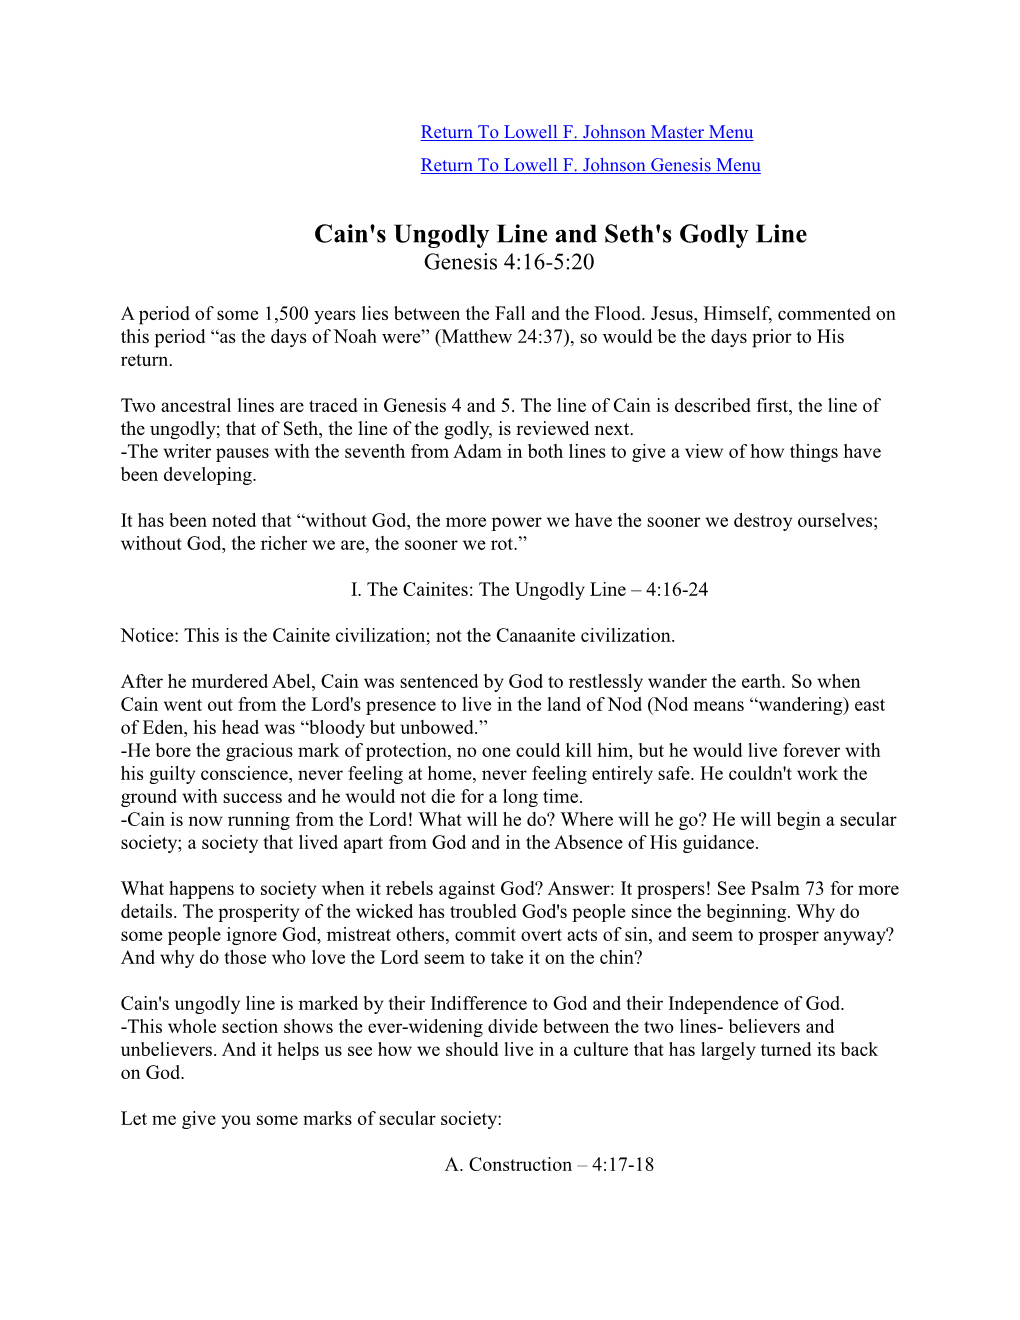 Cain's Ungodly Line and Seth's Godly Line Genesis 4:16-5:20